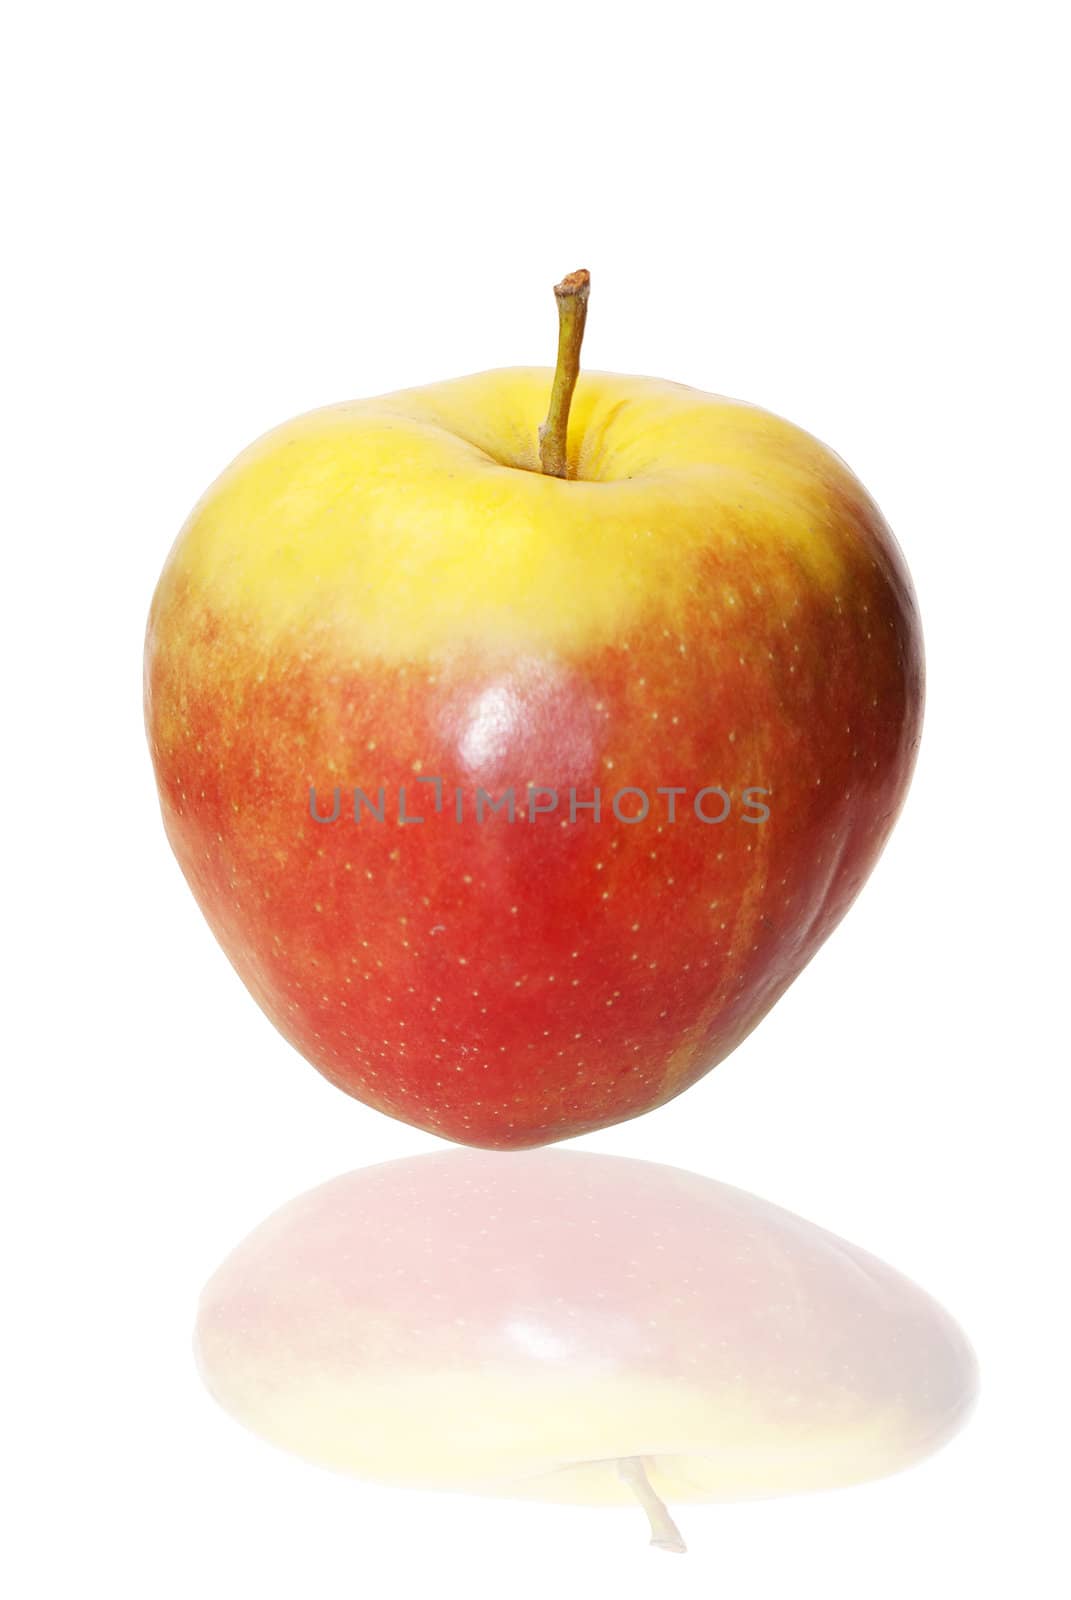 The apple over white background by sergey150770SV